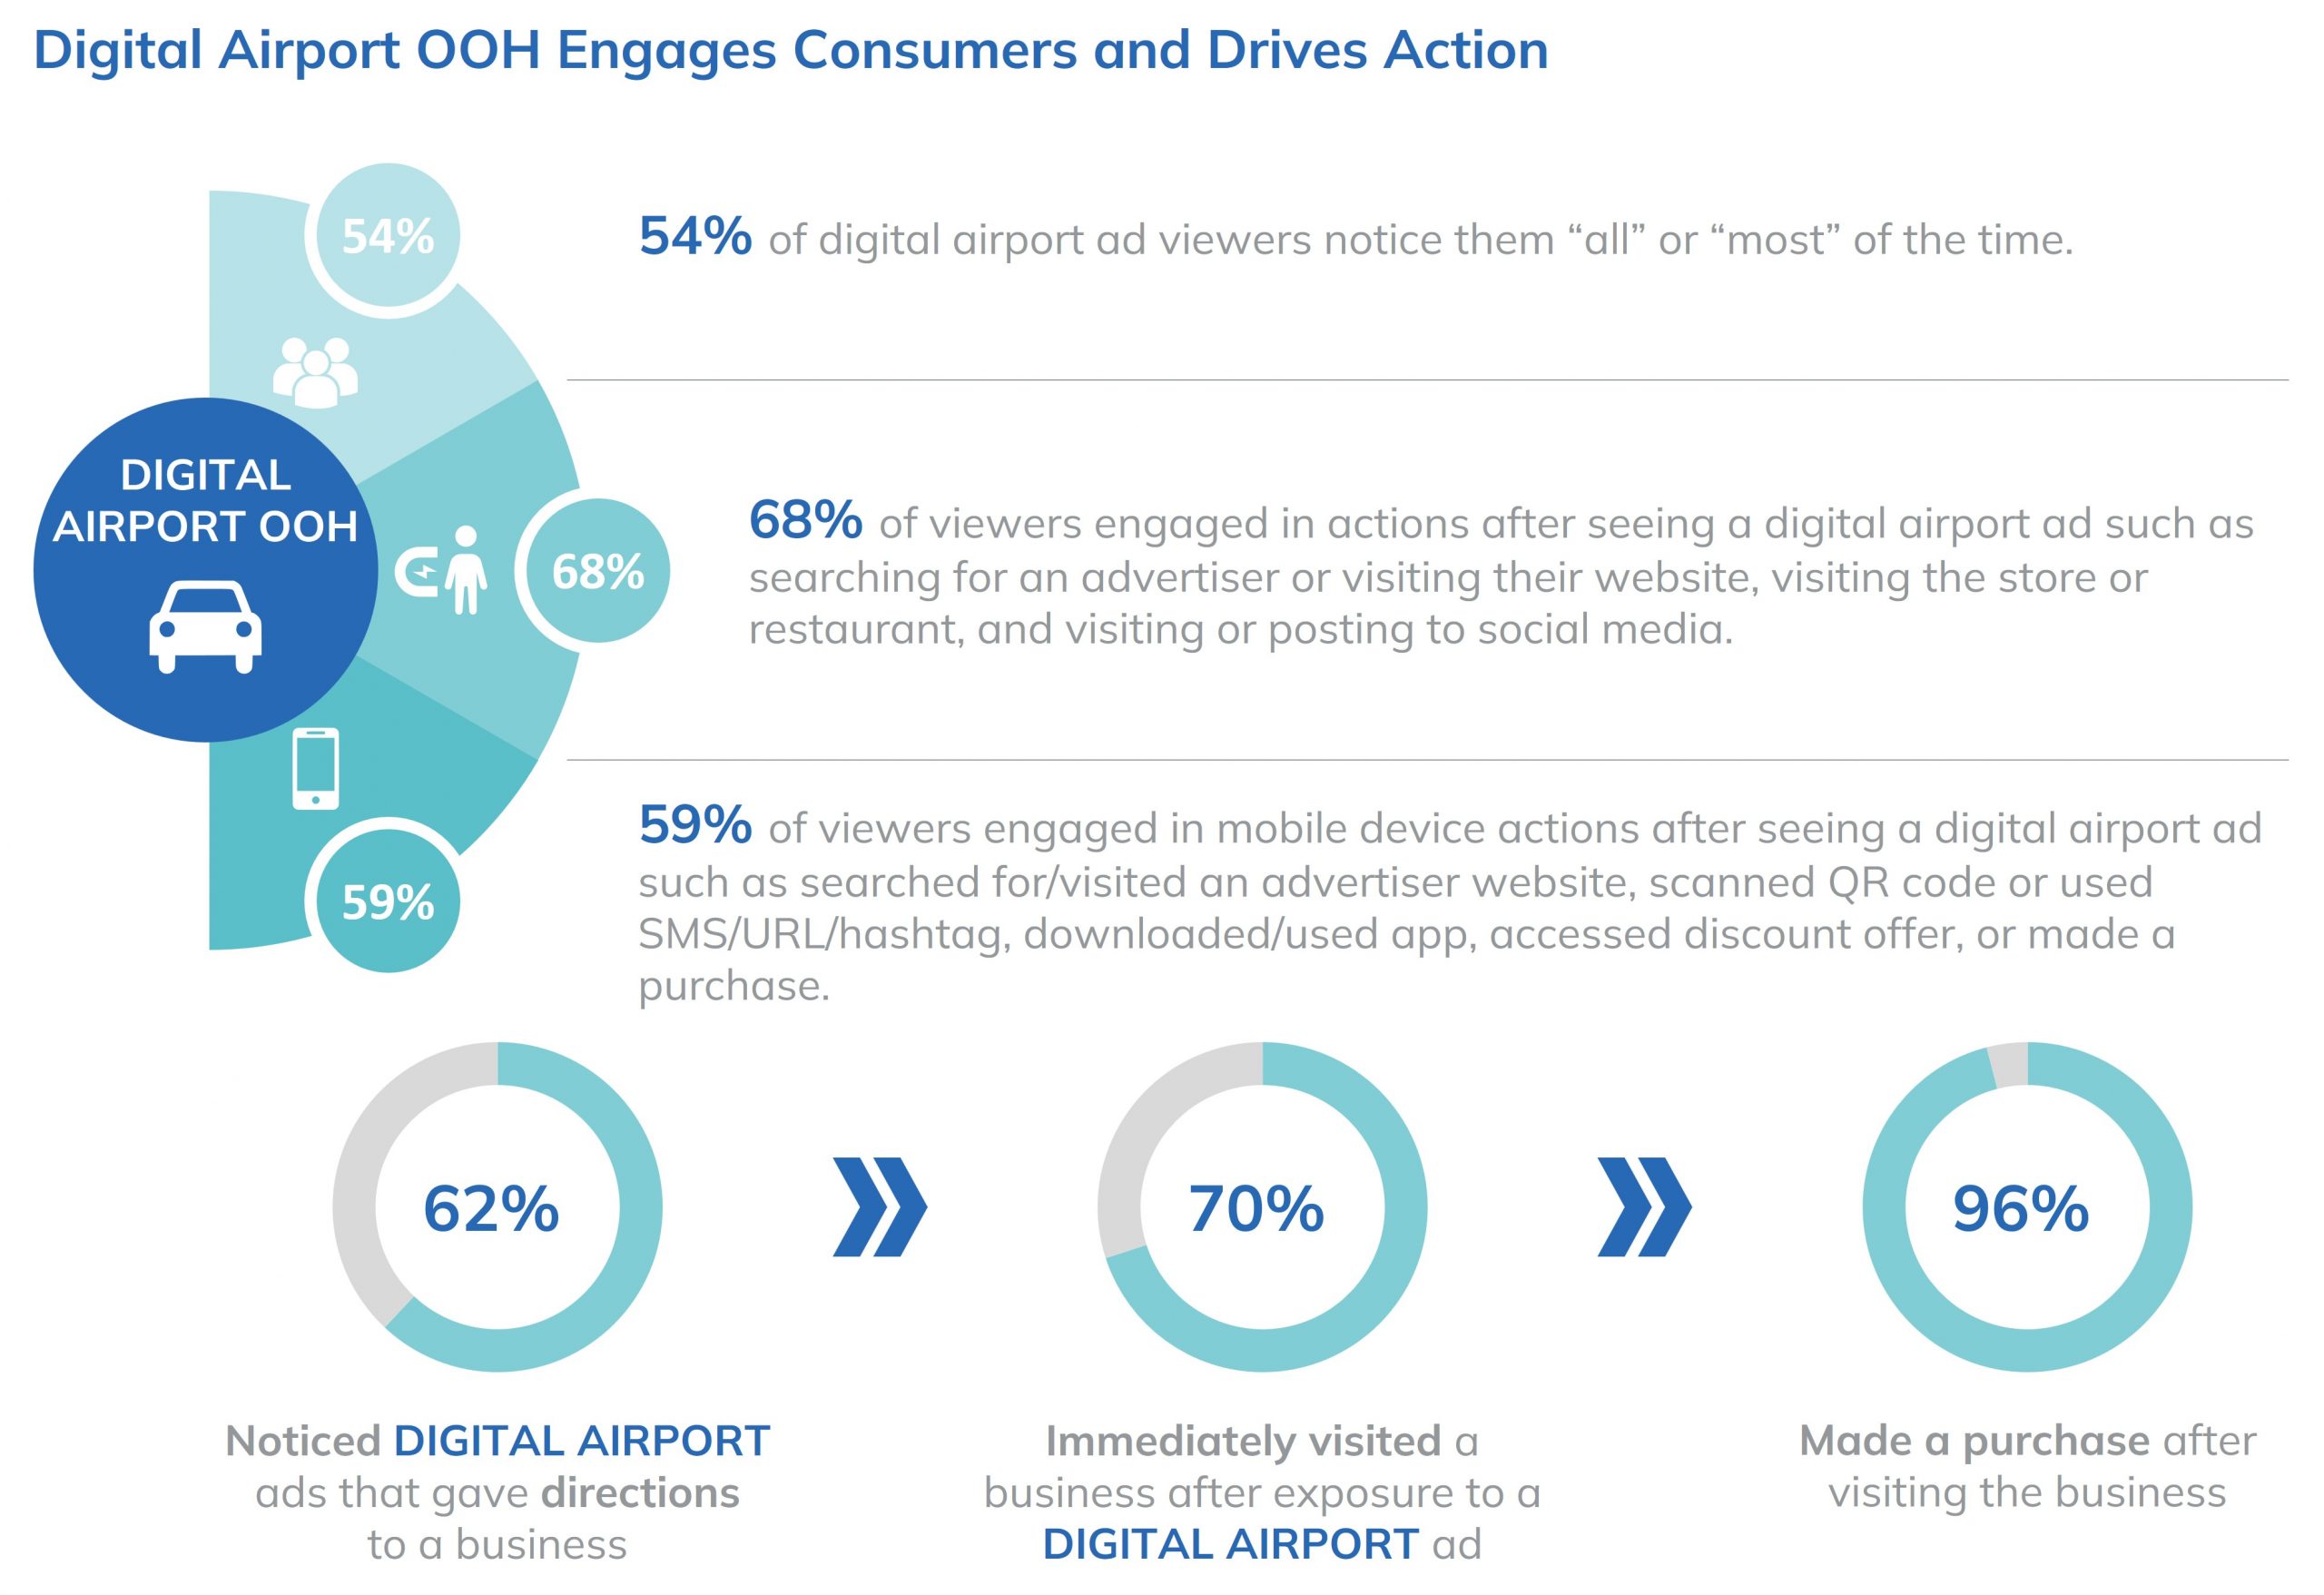 Percentage of consumers that notice Digital Airport OOH ads